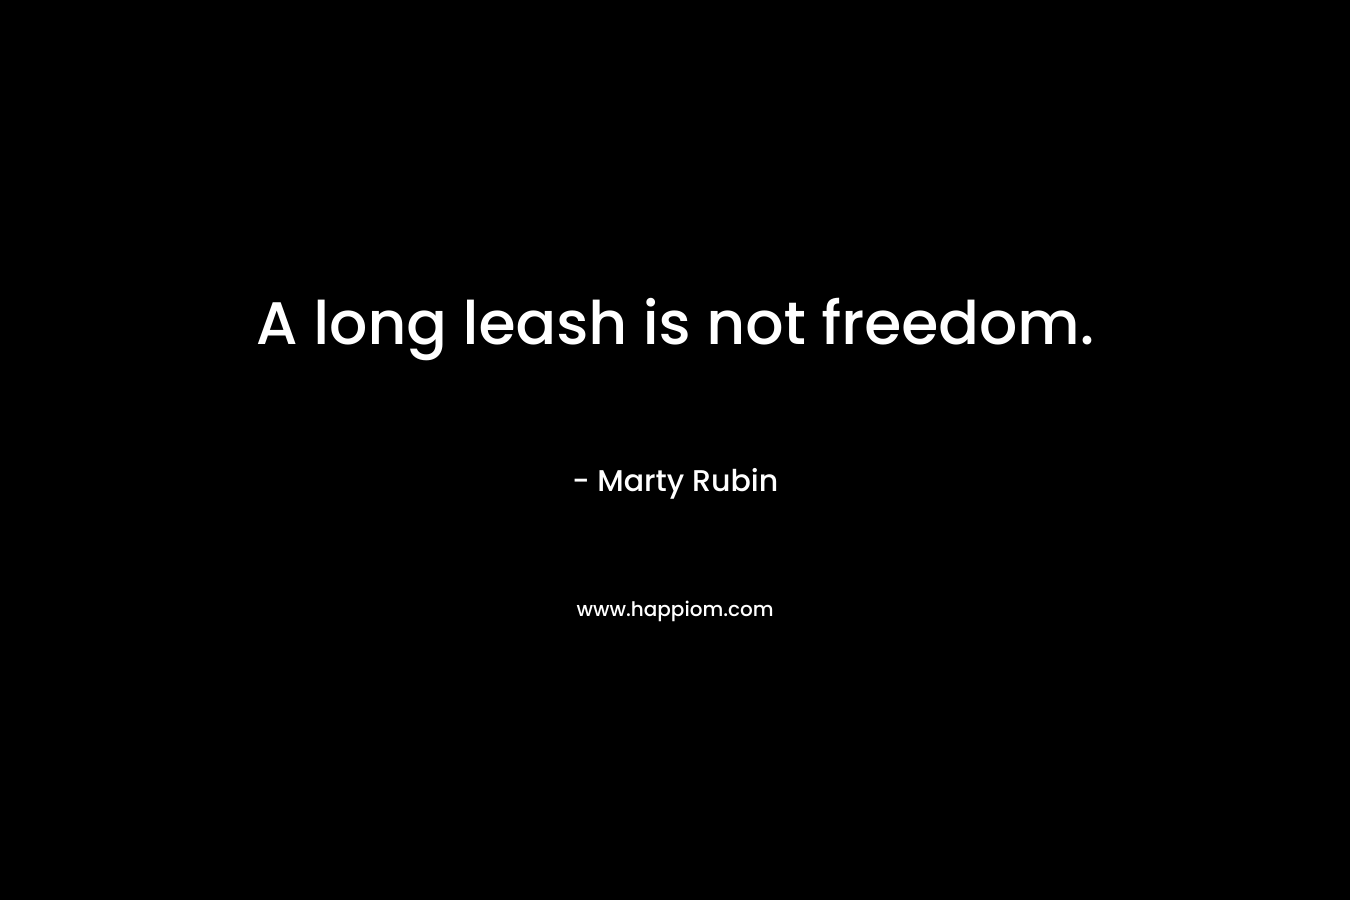 A long leash is not freedom.